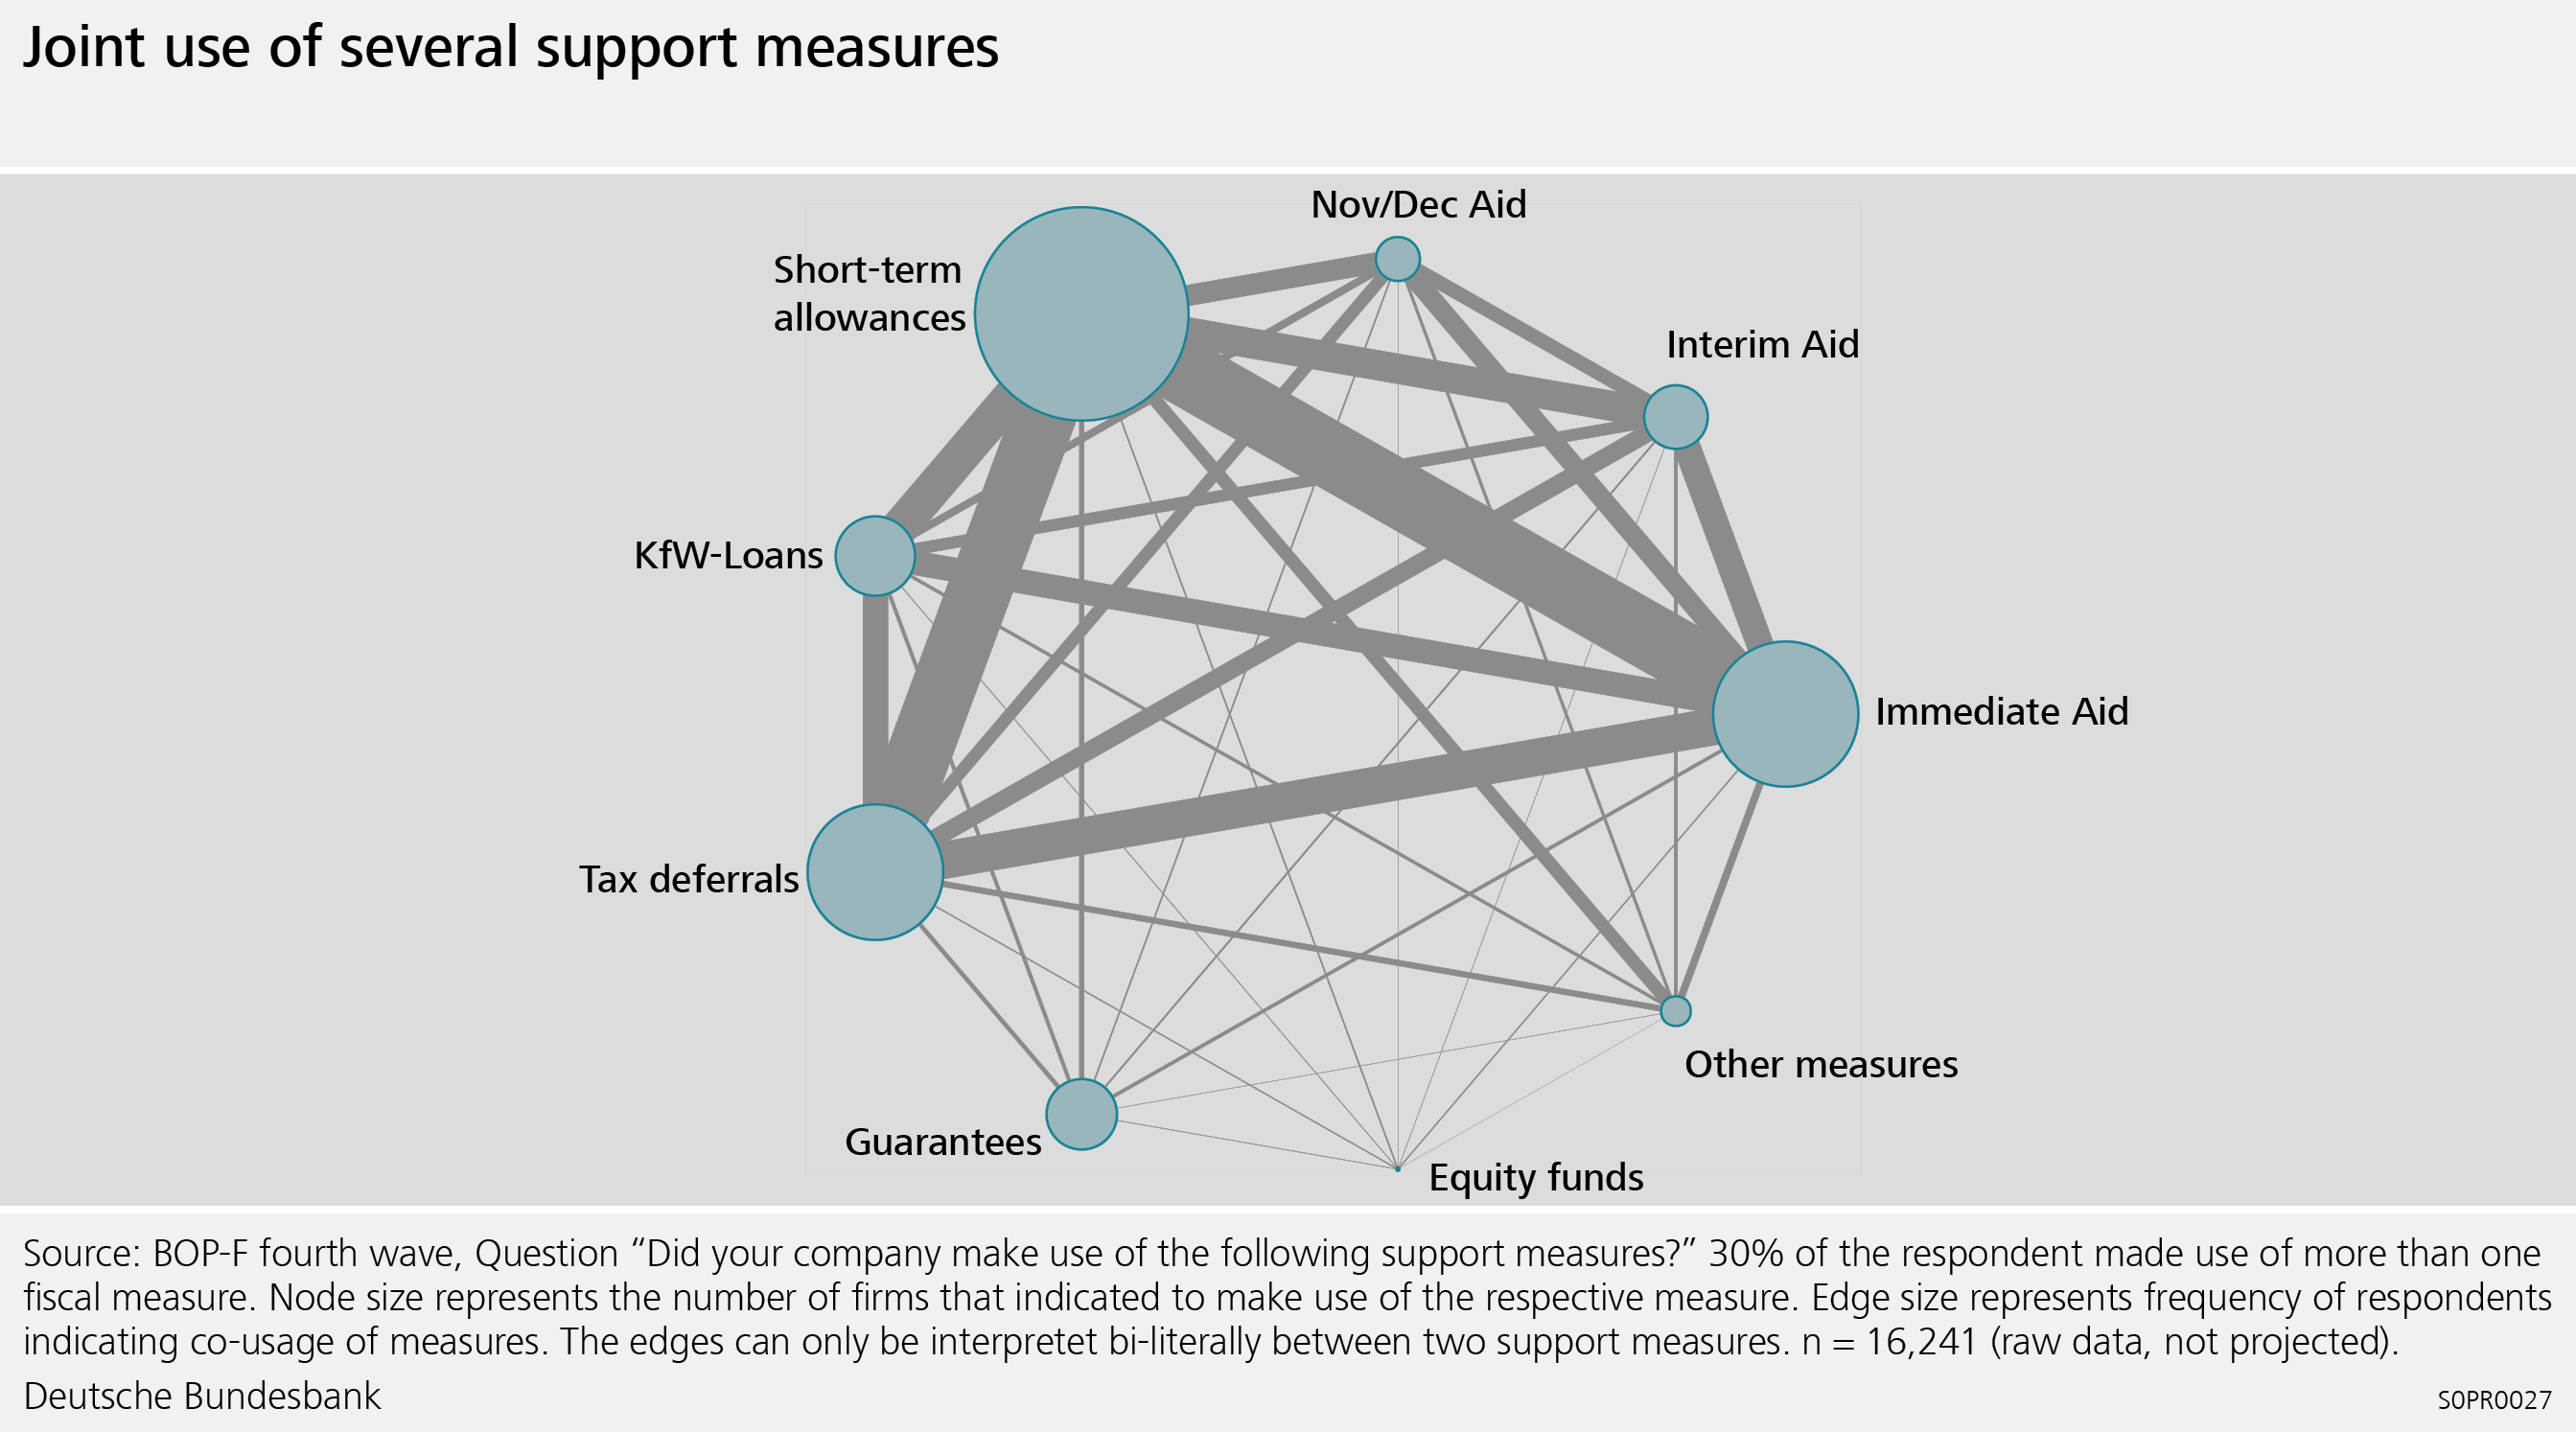 Graph 7: Joint use of several support measures